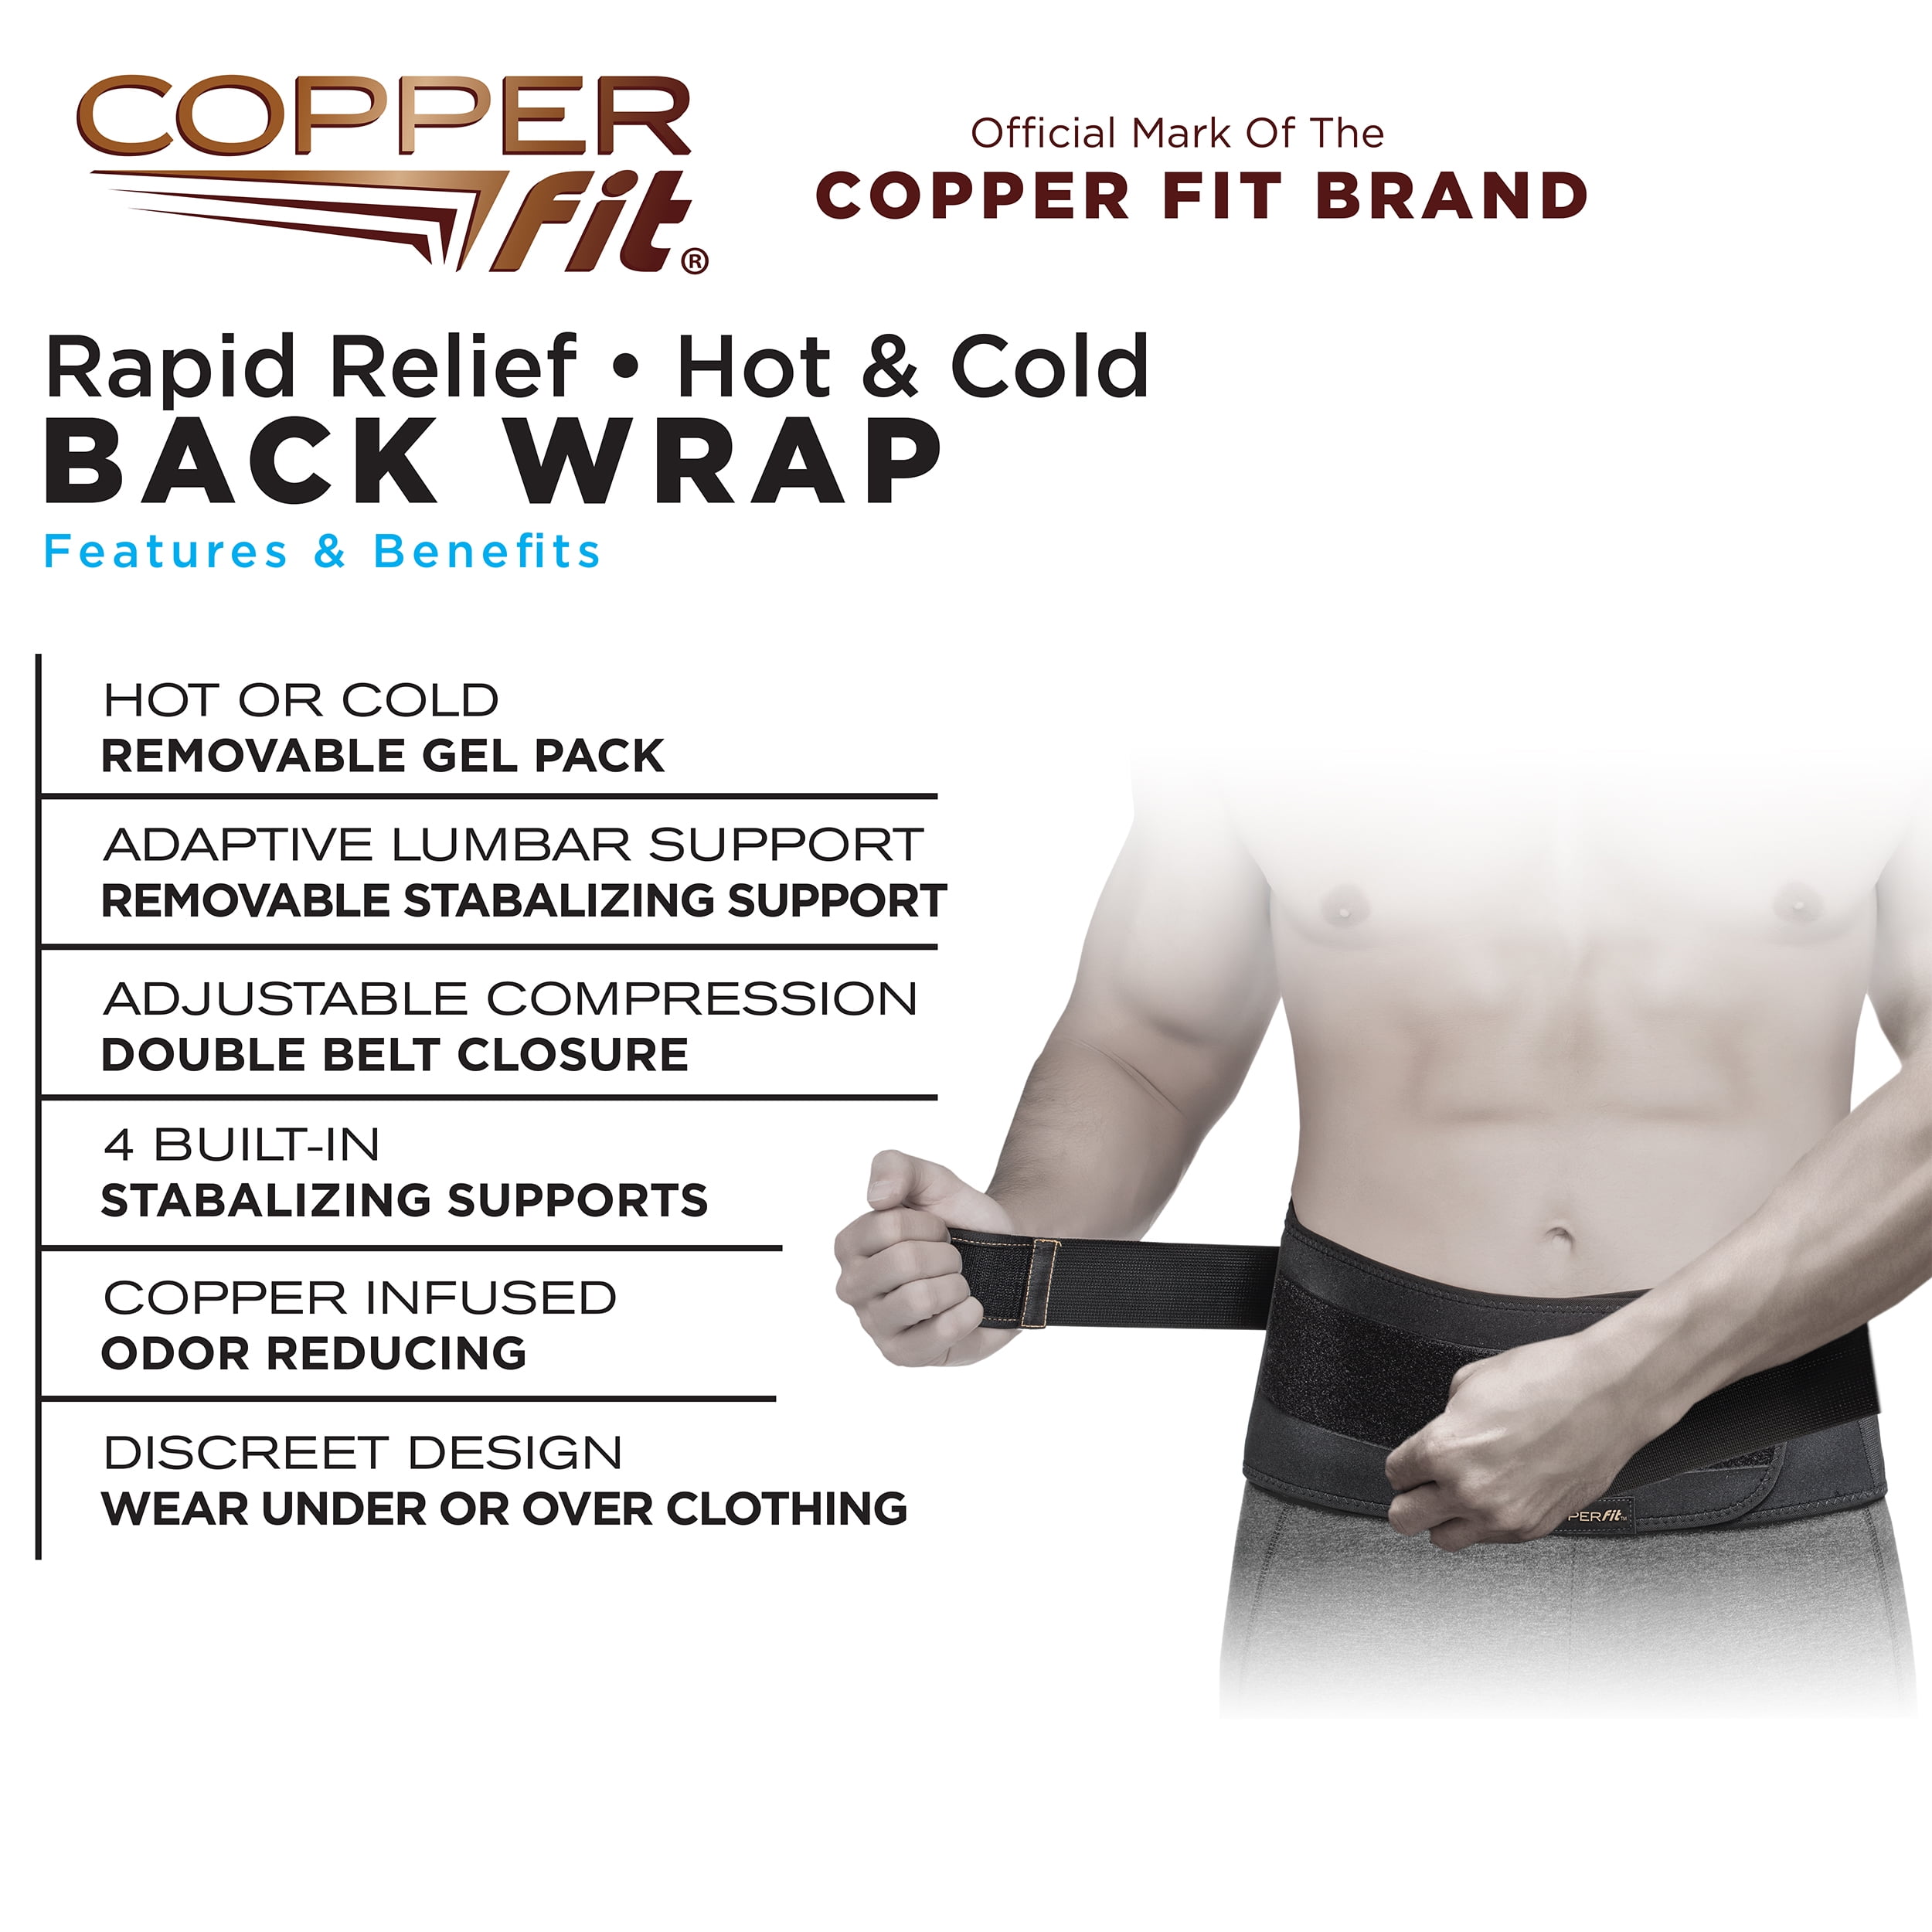 Copper Fit Unisex Adult Rapid Relief Back Support Brace With Hot/cold  Therapy, Black, Adjustablem